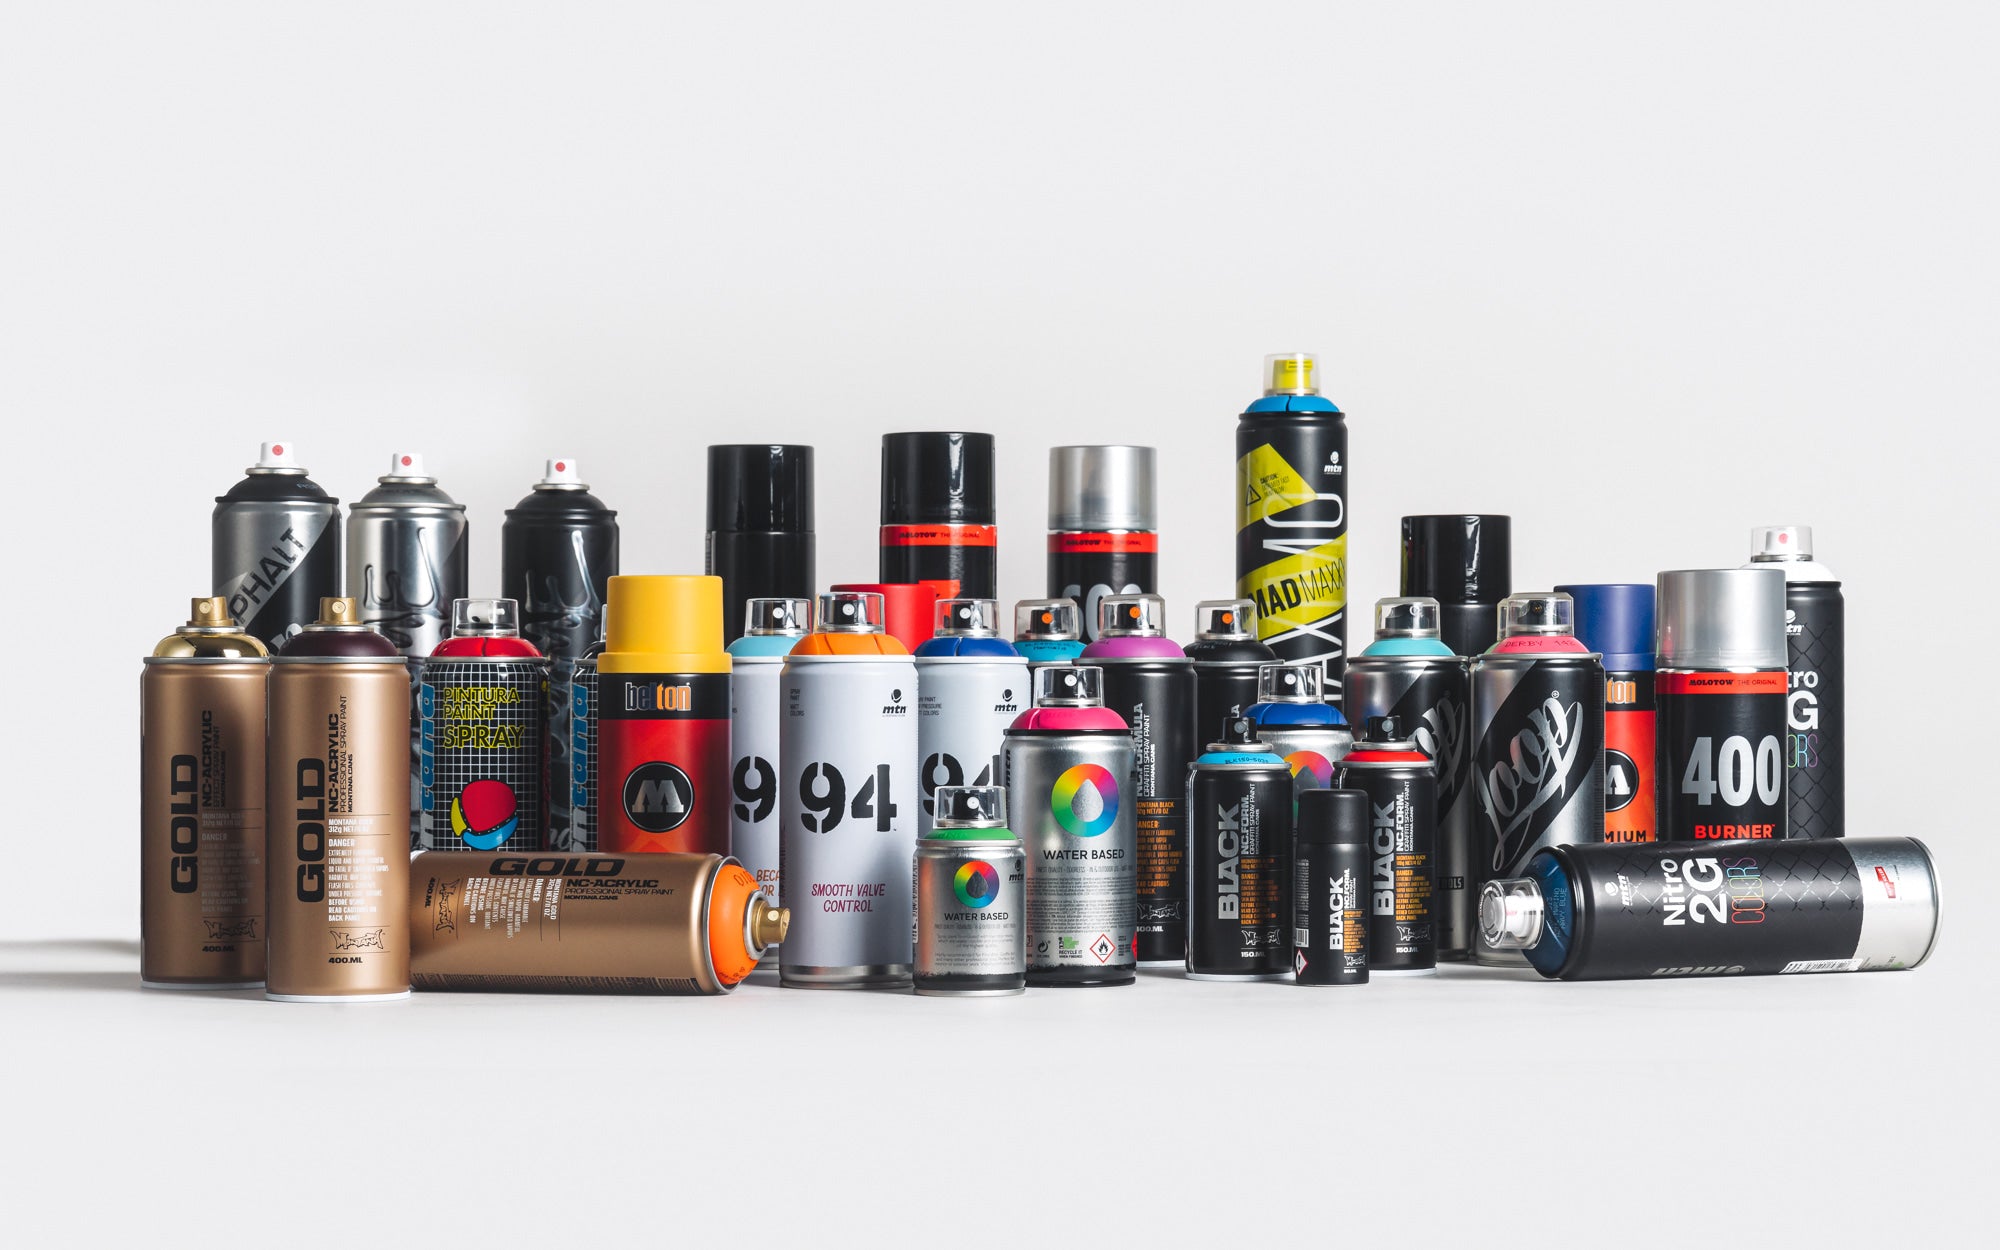 A variety of spray cans and other graffiti cans neatly arranged together.